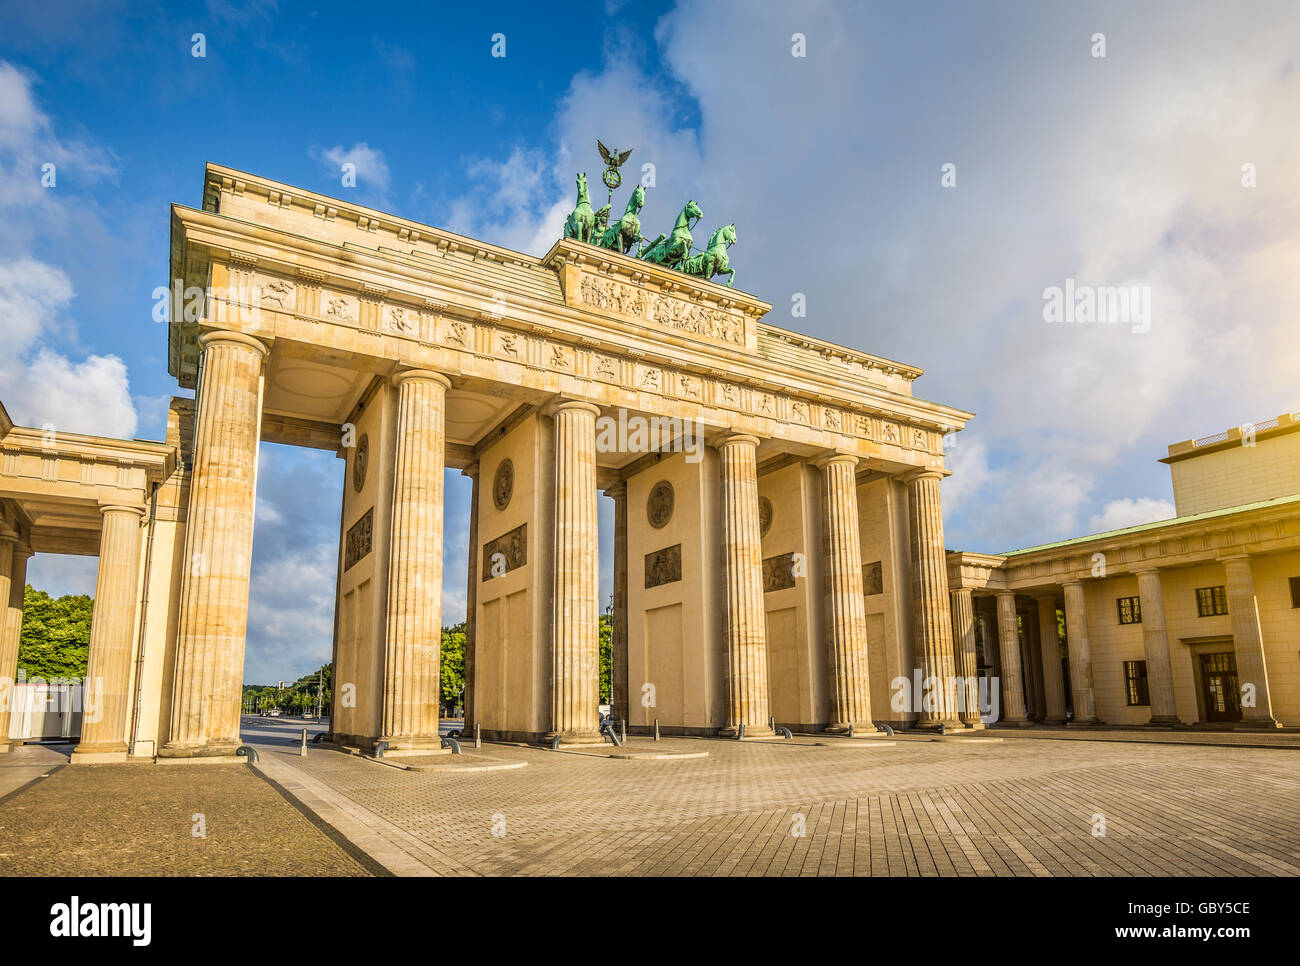 Classic view of famous Brandenburg Gate in beautiful golden morning light with blue sky and clouds, central Berlin, Germany Stock Photo